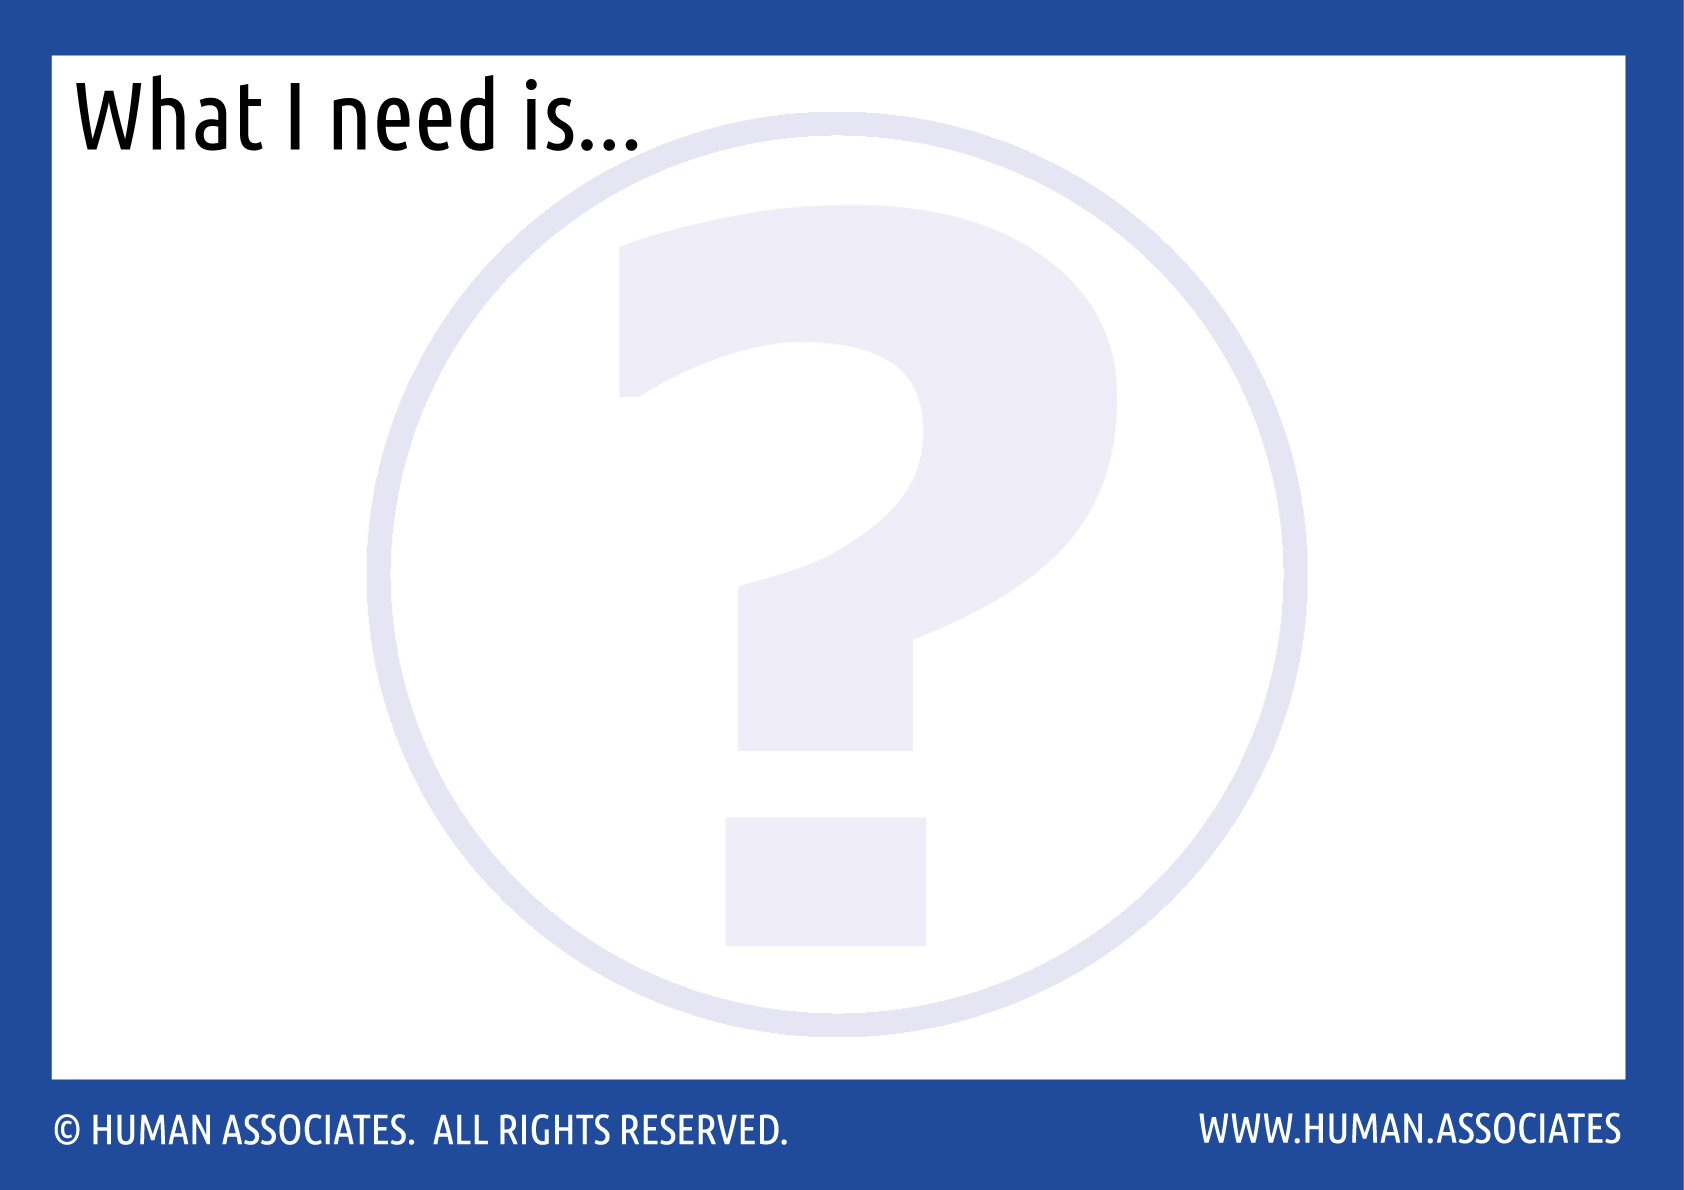 What Do You Need? Response